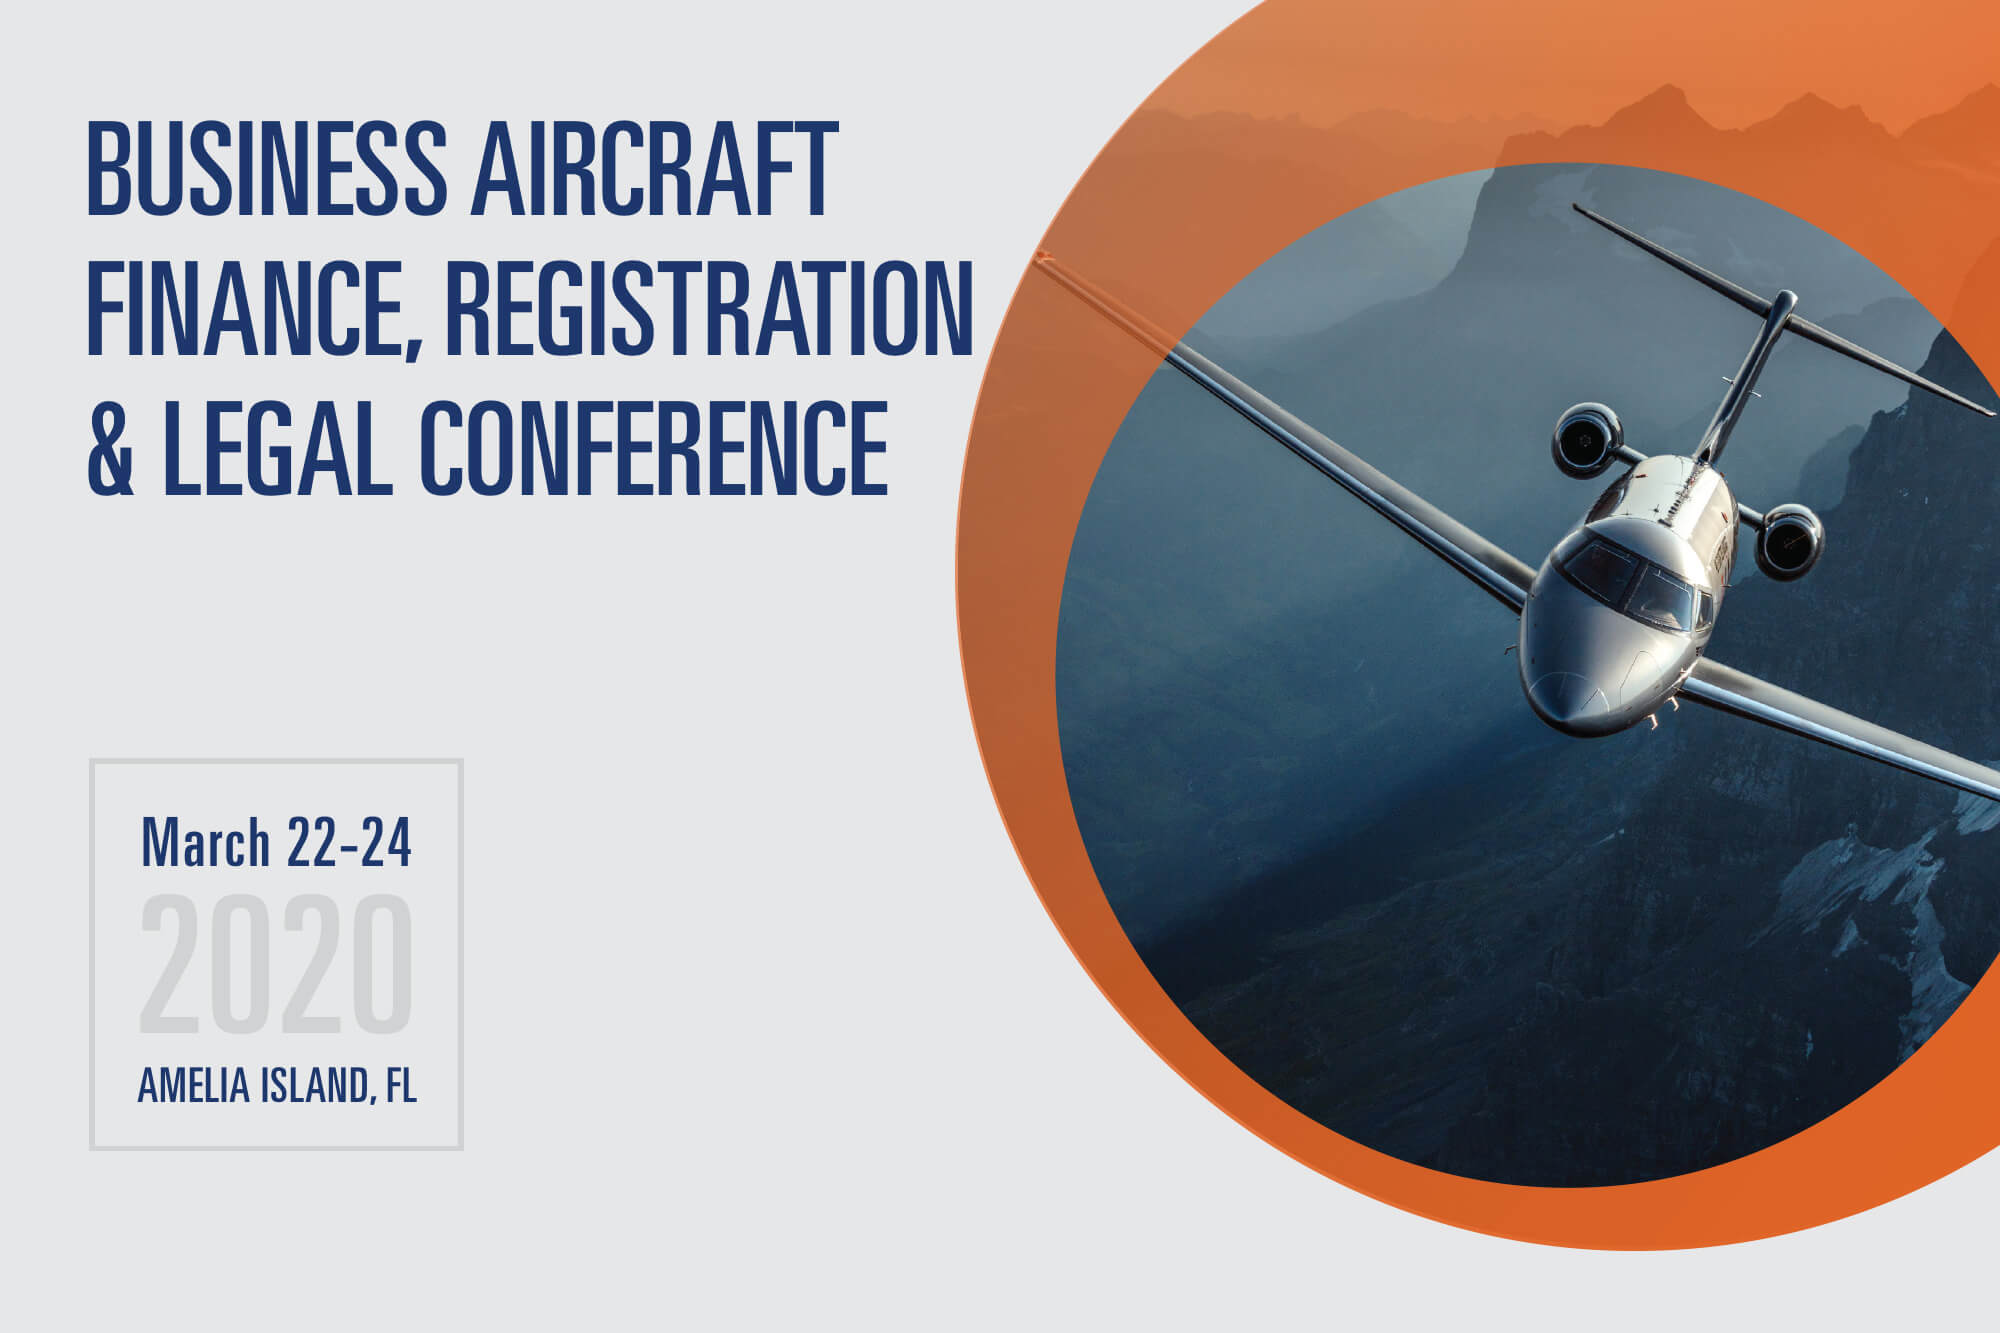 2020 Business Aircraft Finance, Registration & Legal Conference NBAA National Business